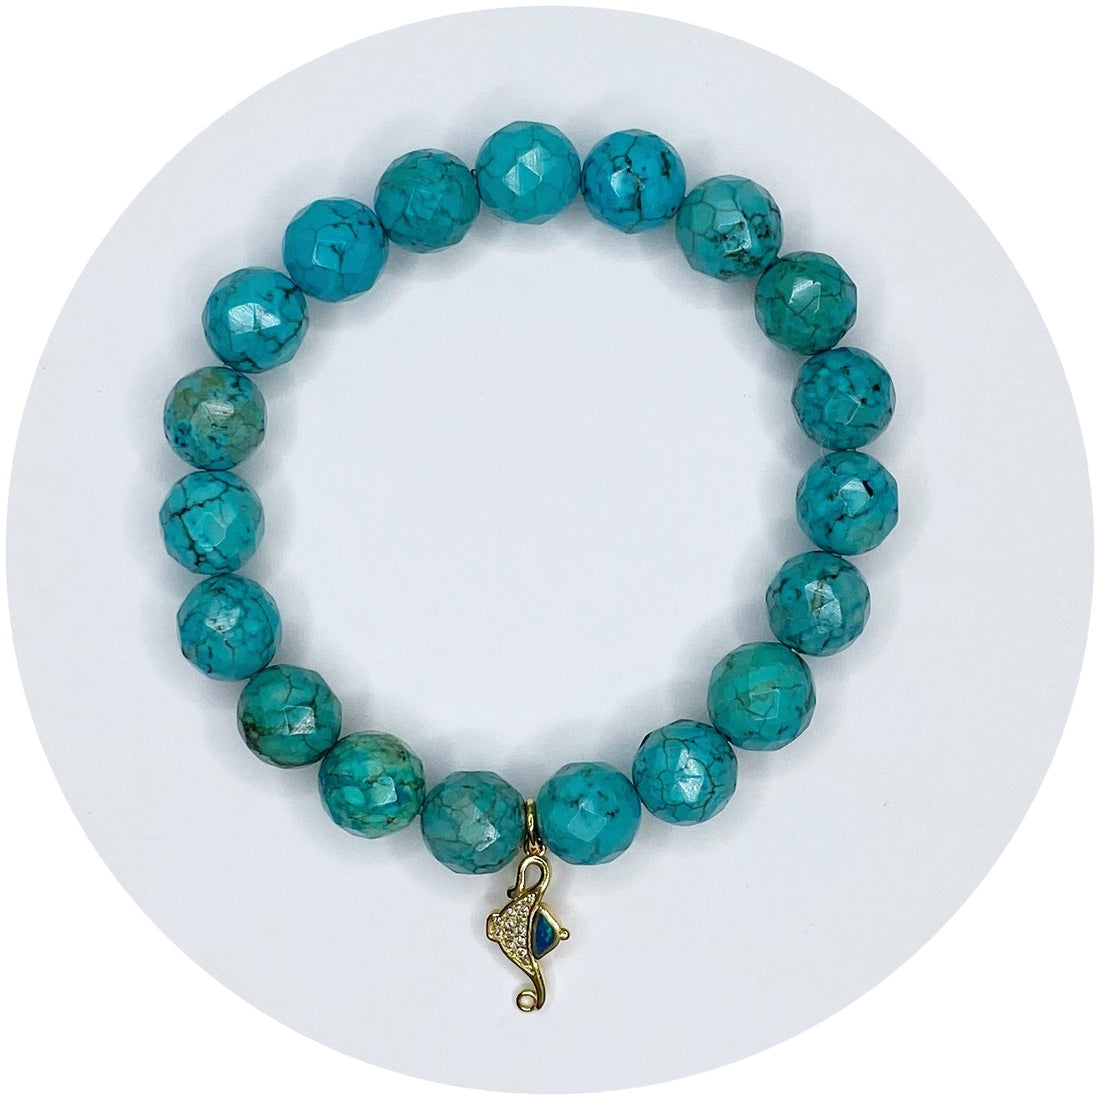 Green Turquoise Magnesite with Pavé Aladdin Lamp